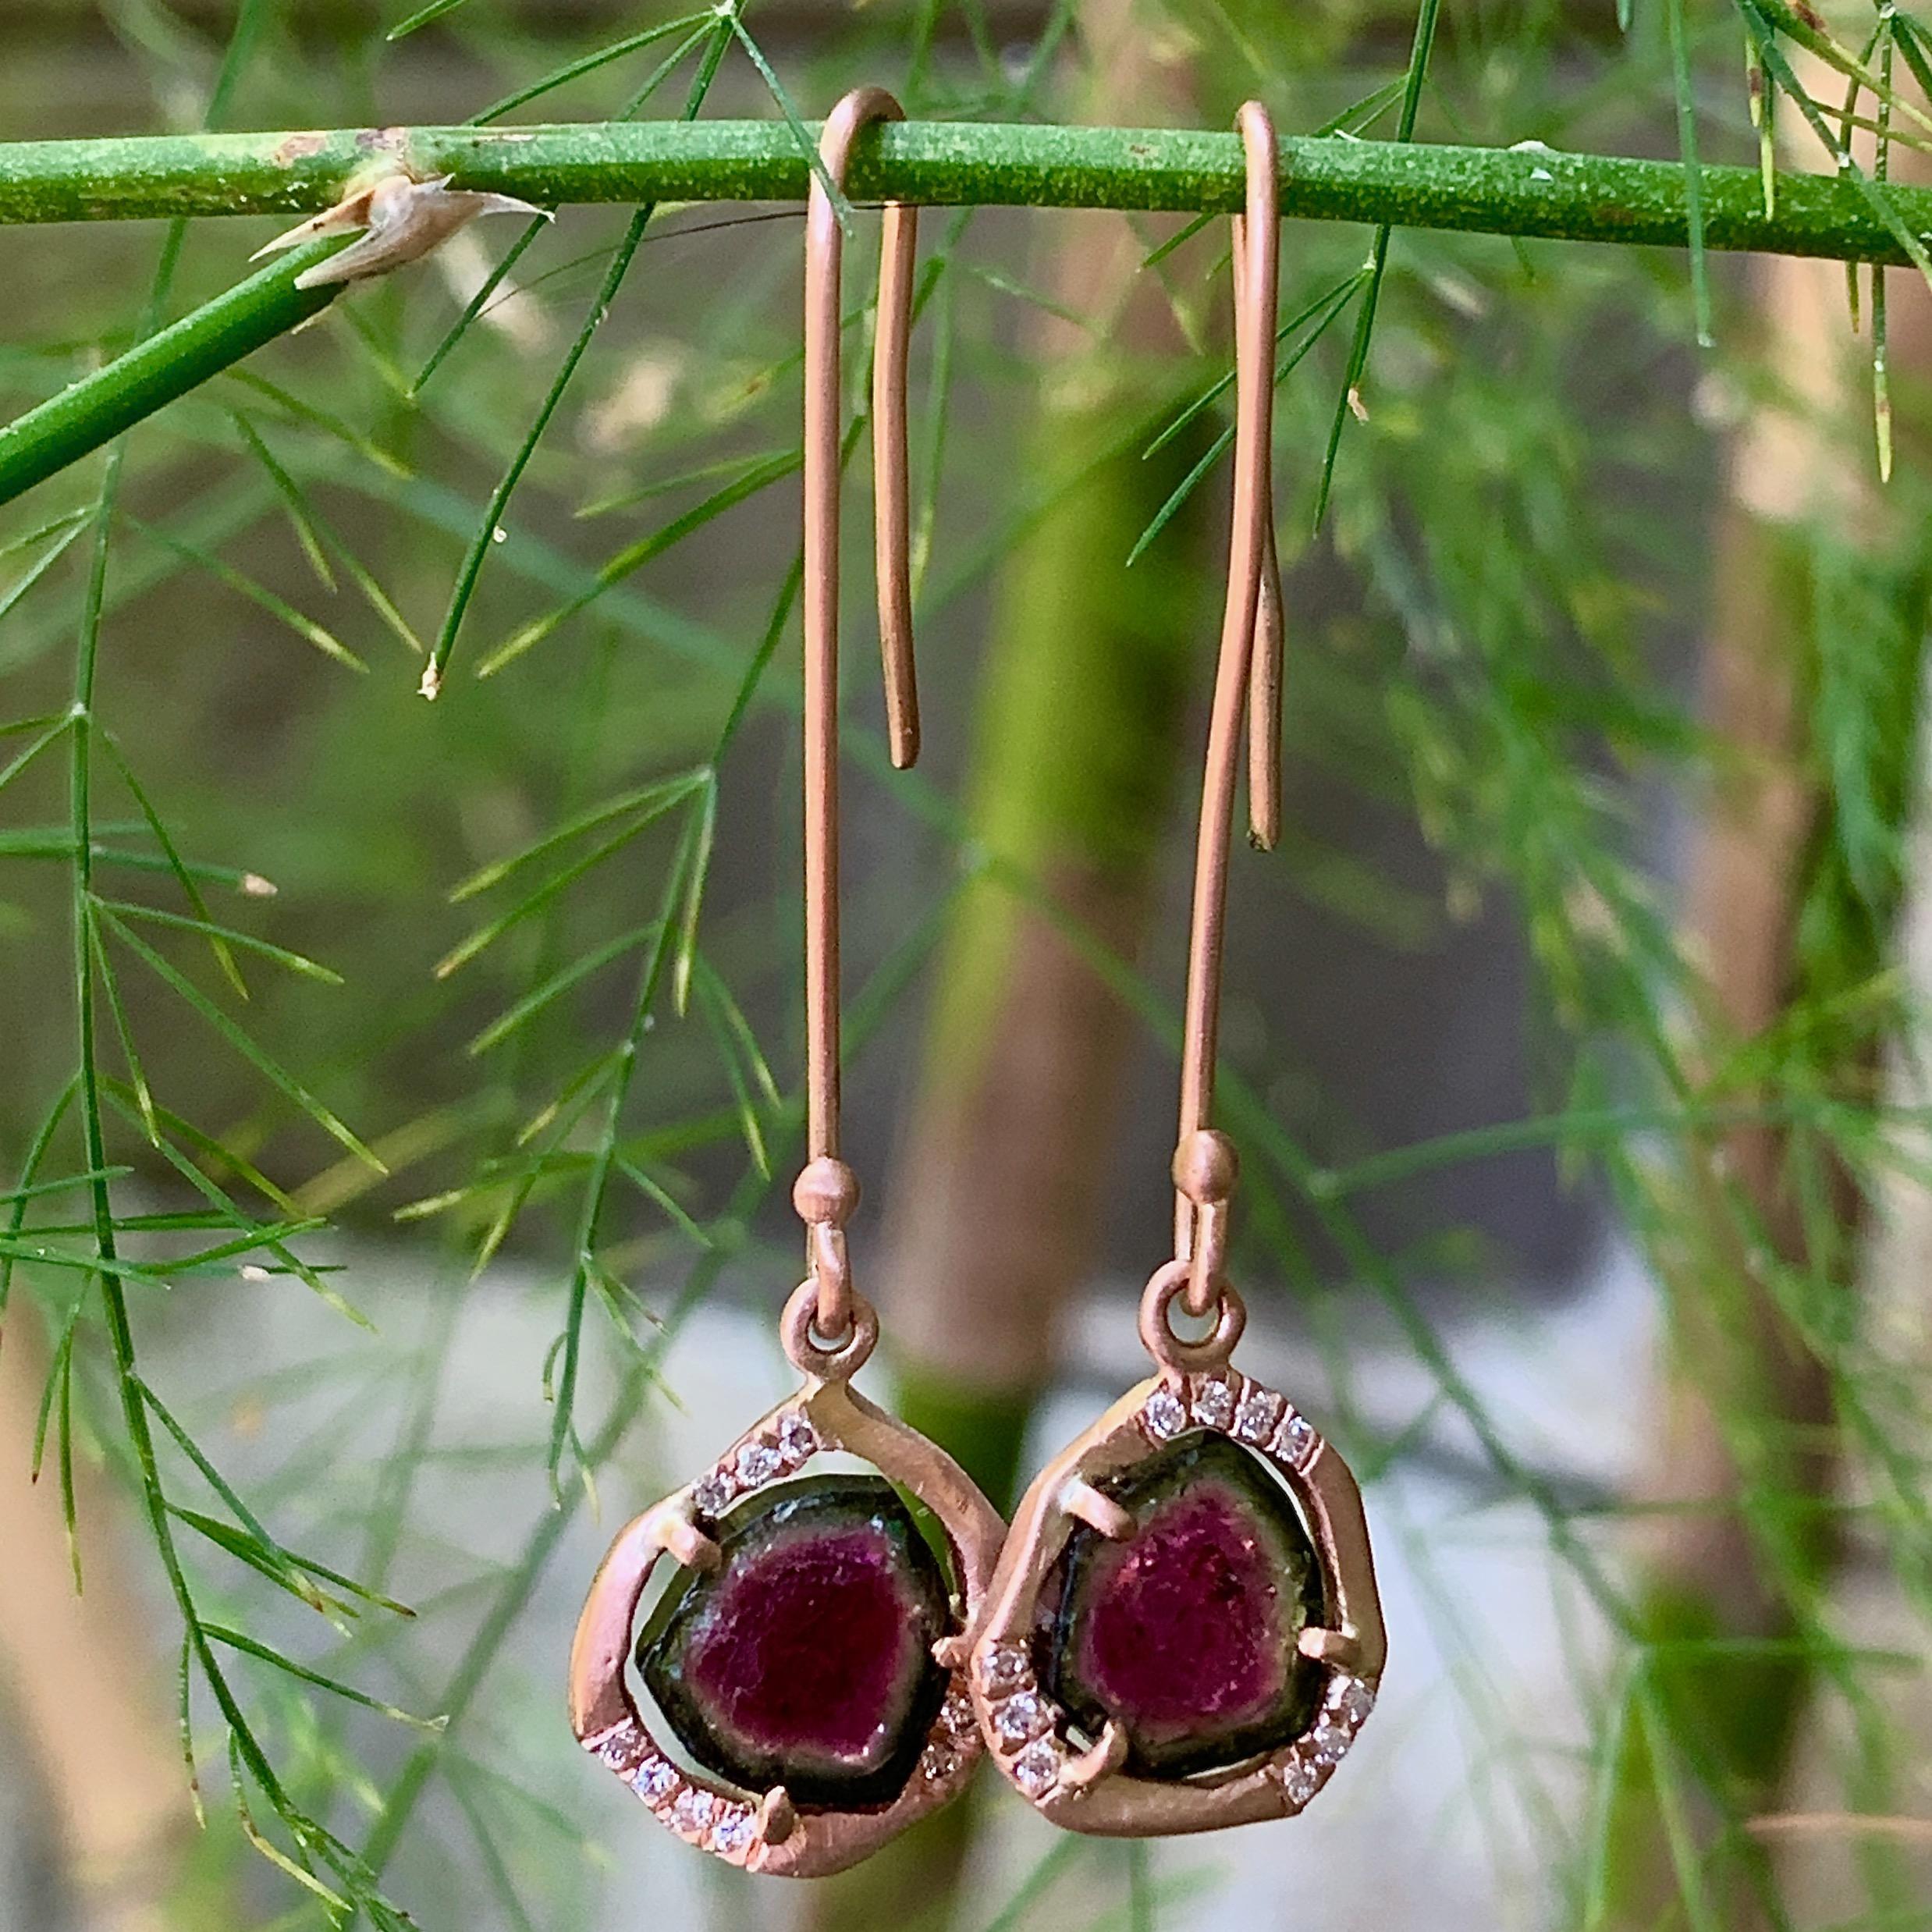 Eytan Brandes made these earrings to show off two intensely colored, freeform slices of natural watermelon tourmaline from the Himalaya Tourmaline Mine in San Diego County.

The frosty, hand-finished rose gold halos hold the tourmalines in place